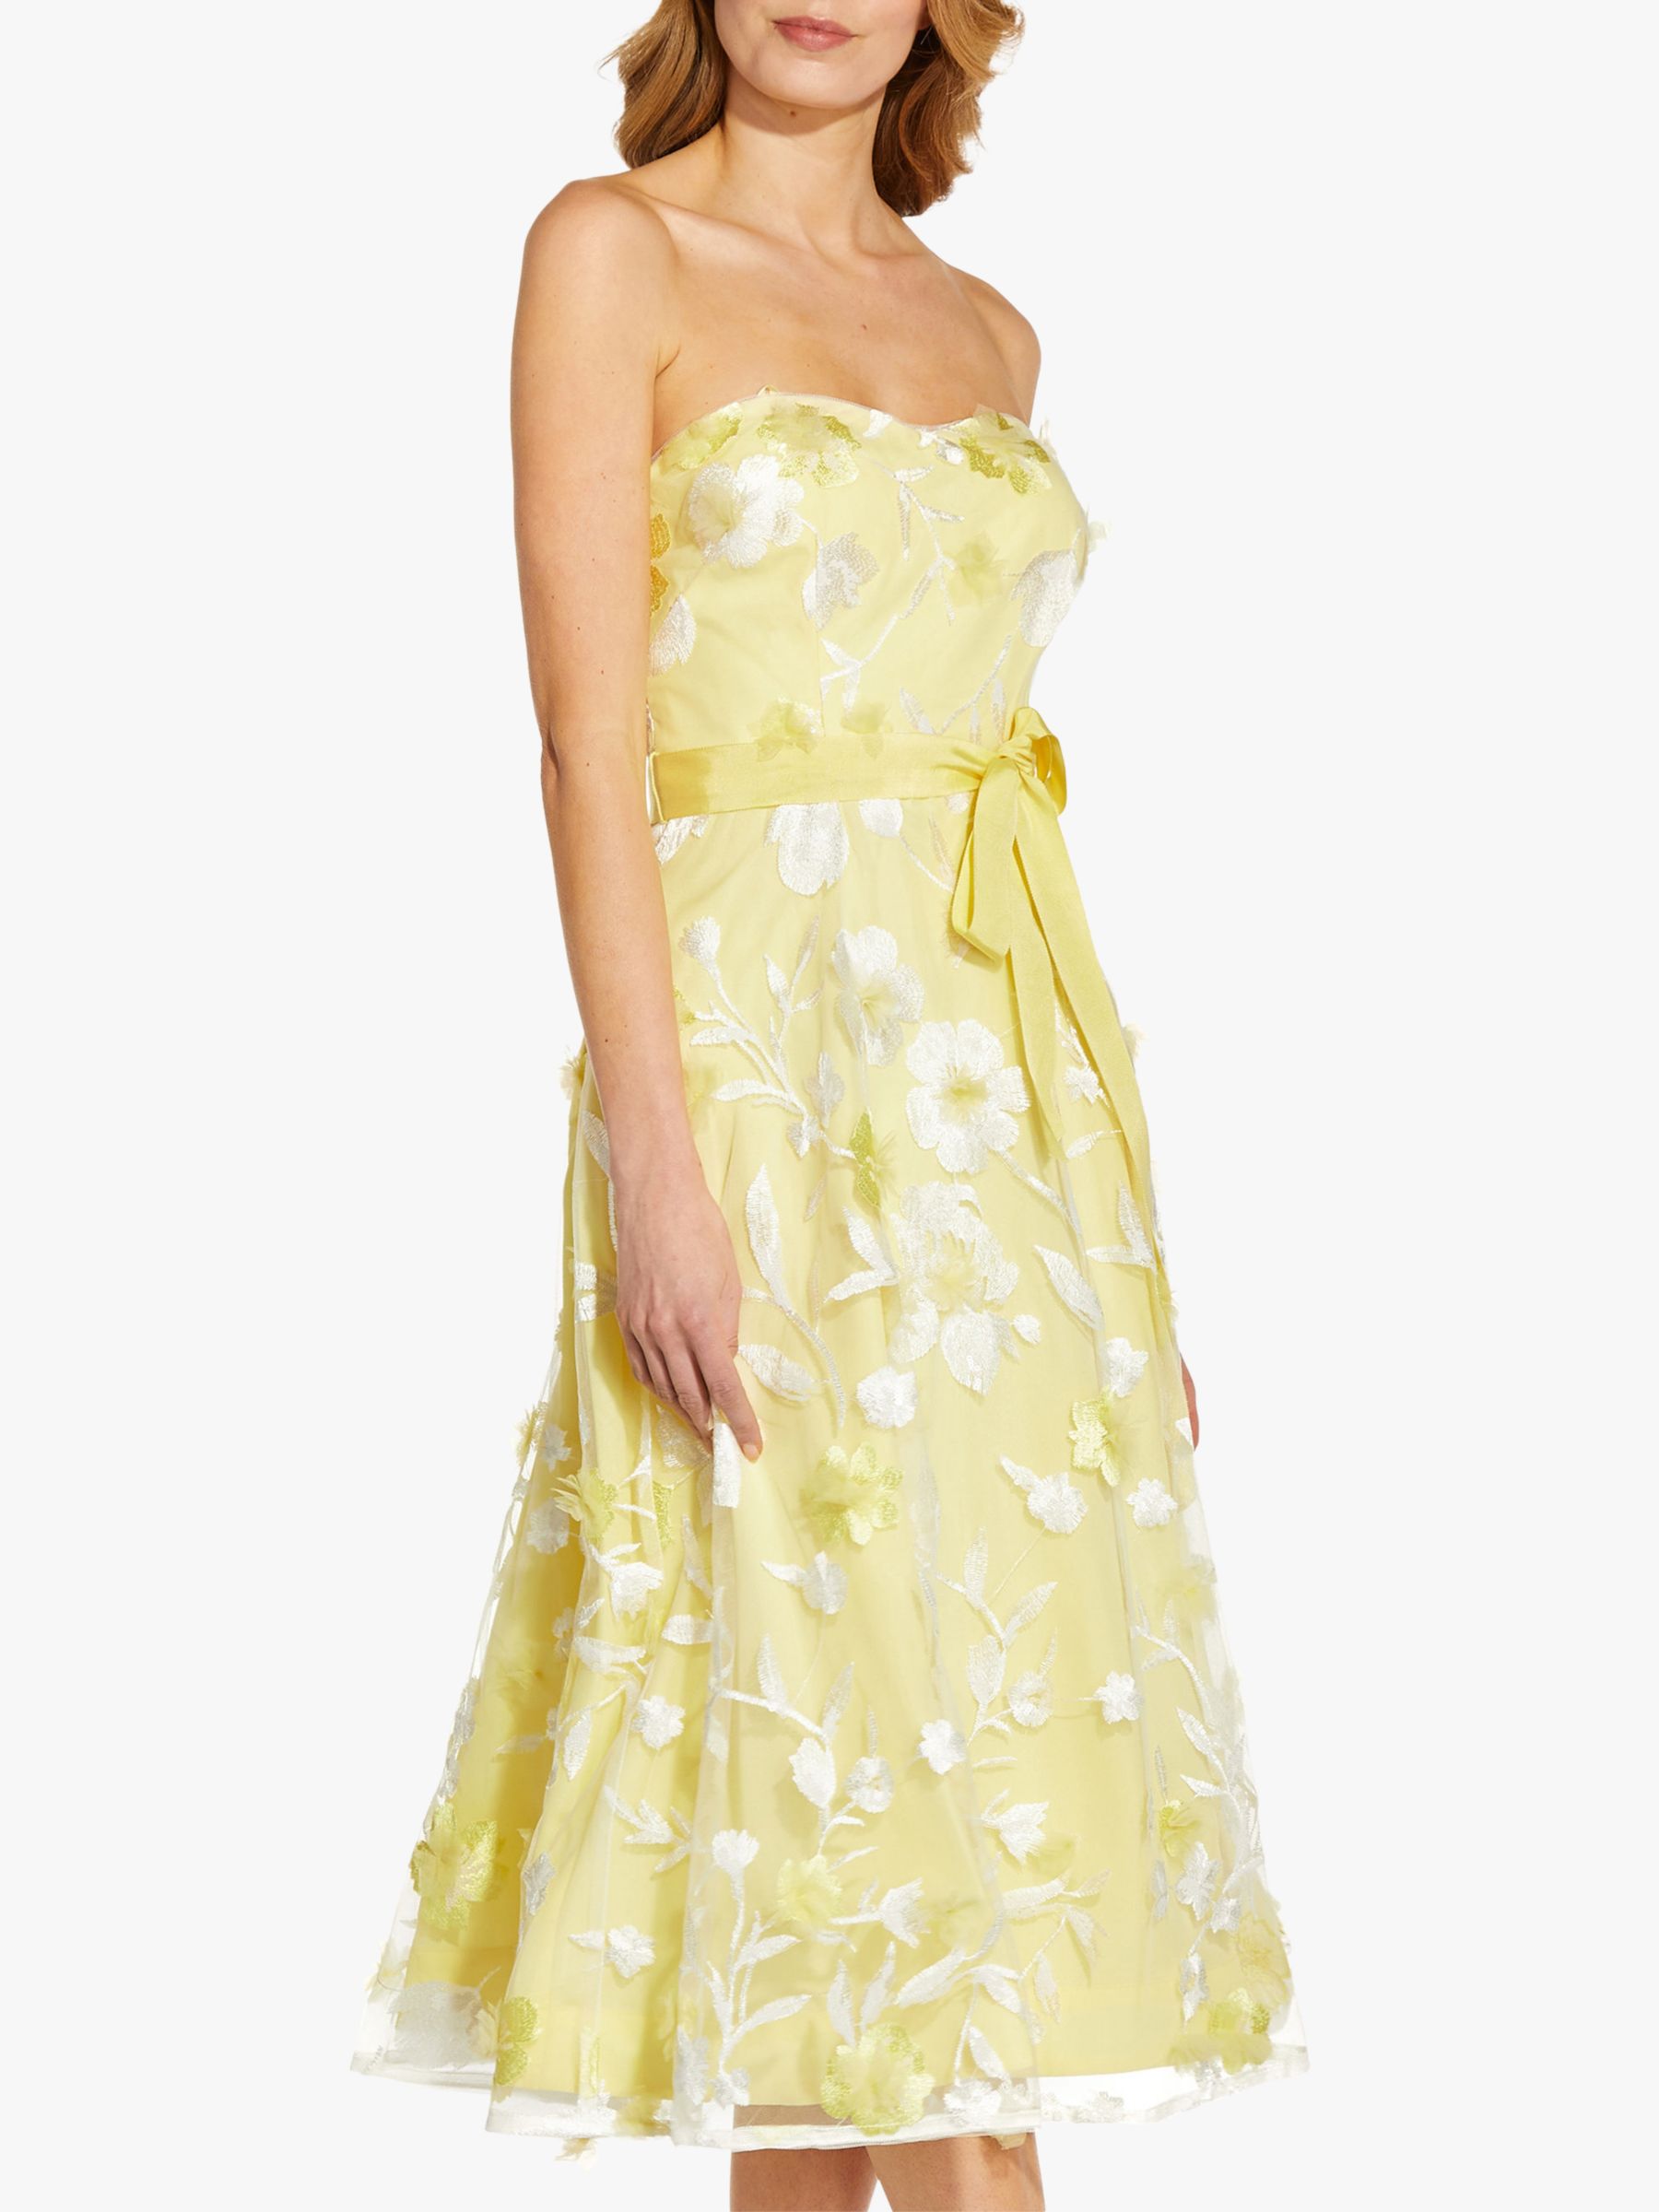 Adrianna Papell Floral Embroidered Strapless Tea Dress, Lemon Souffle